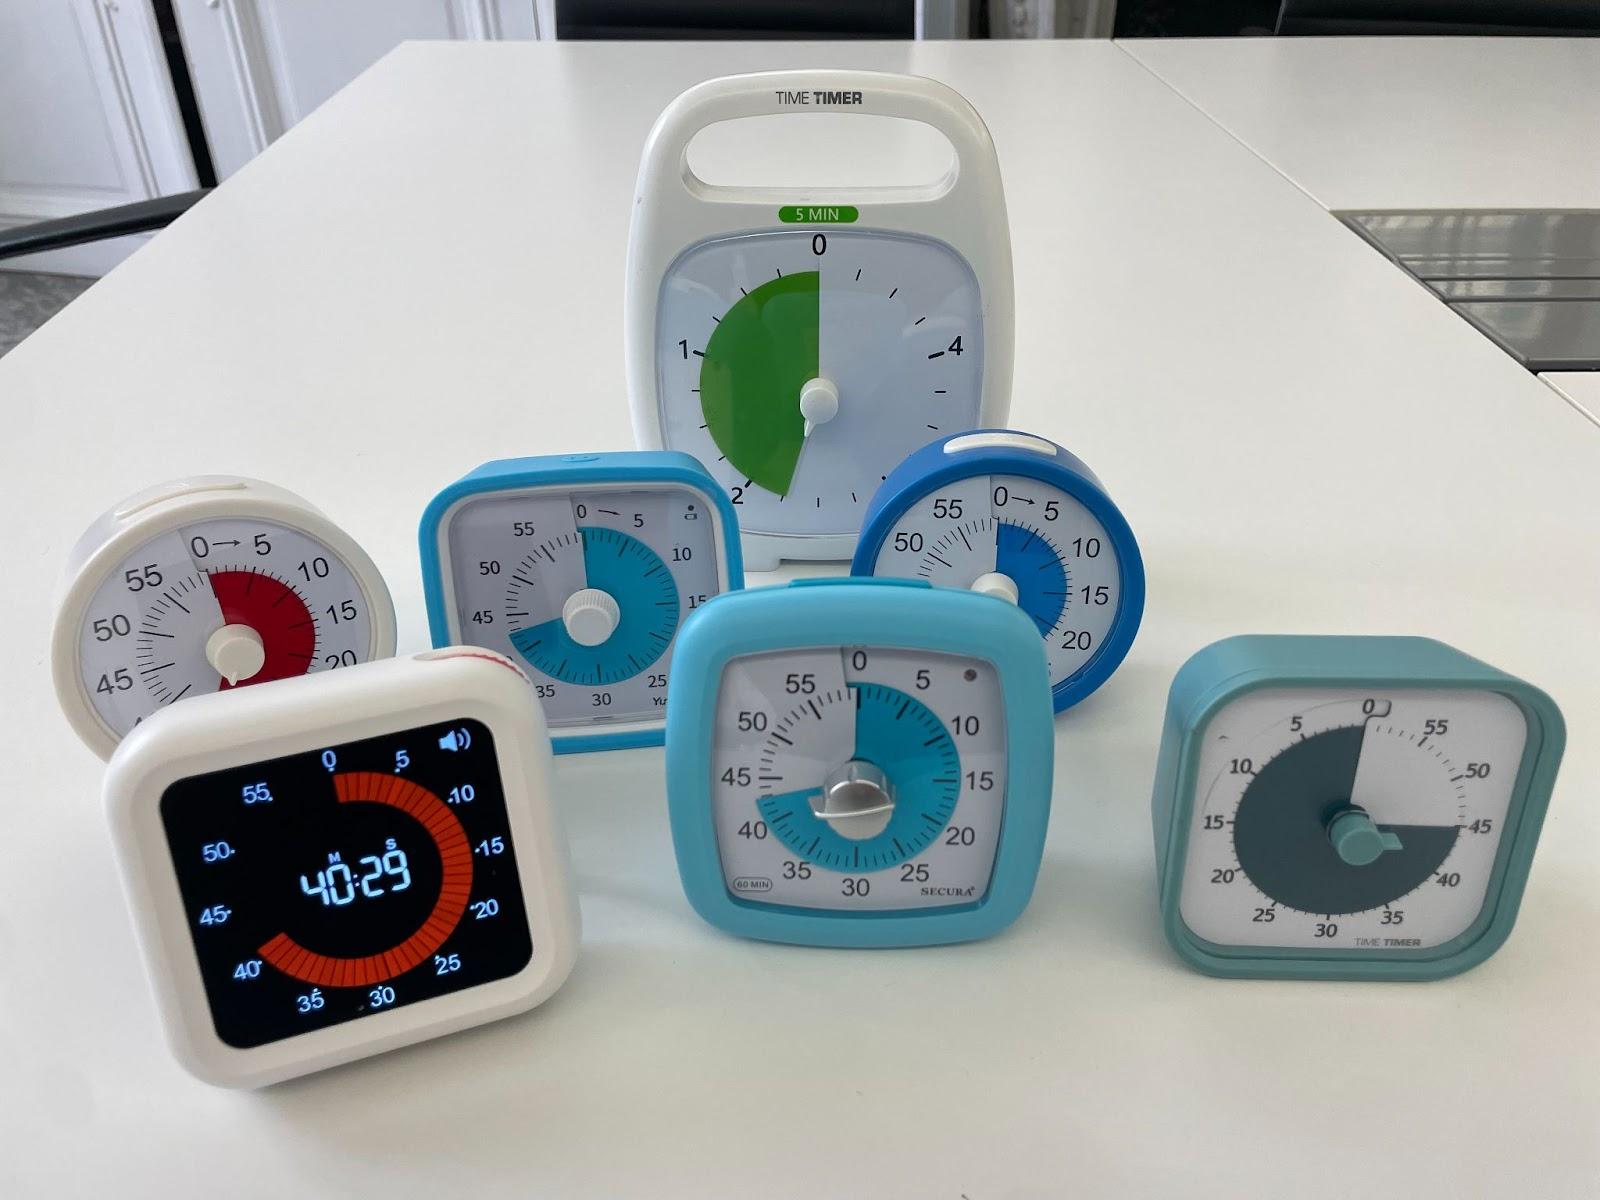 7 Visual Timers for Children - Our Selection